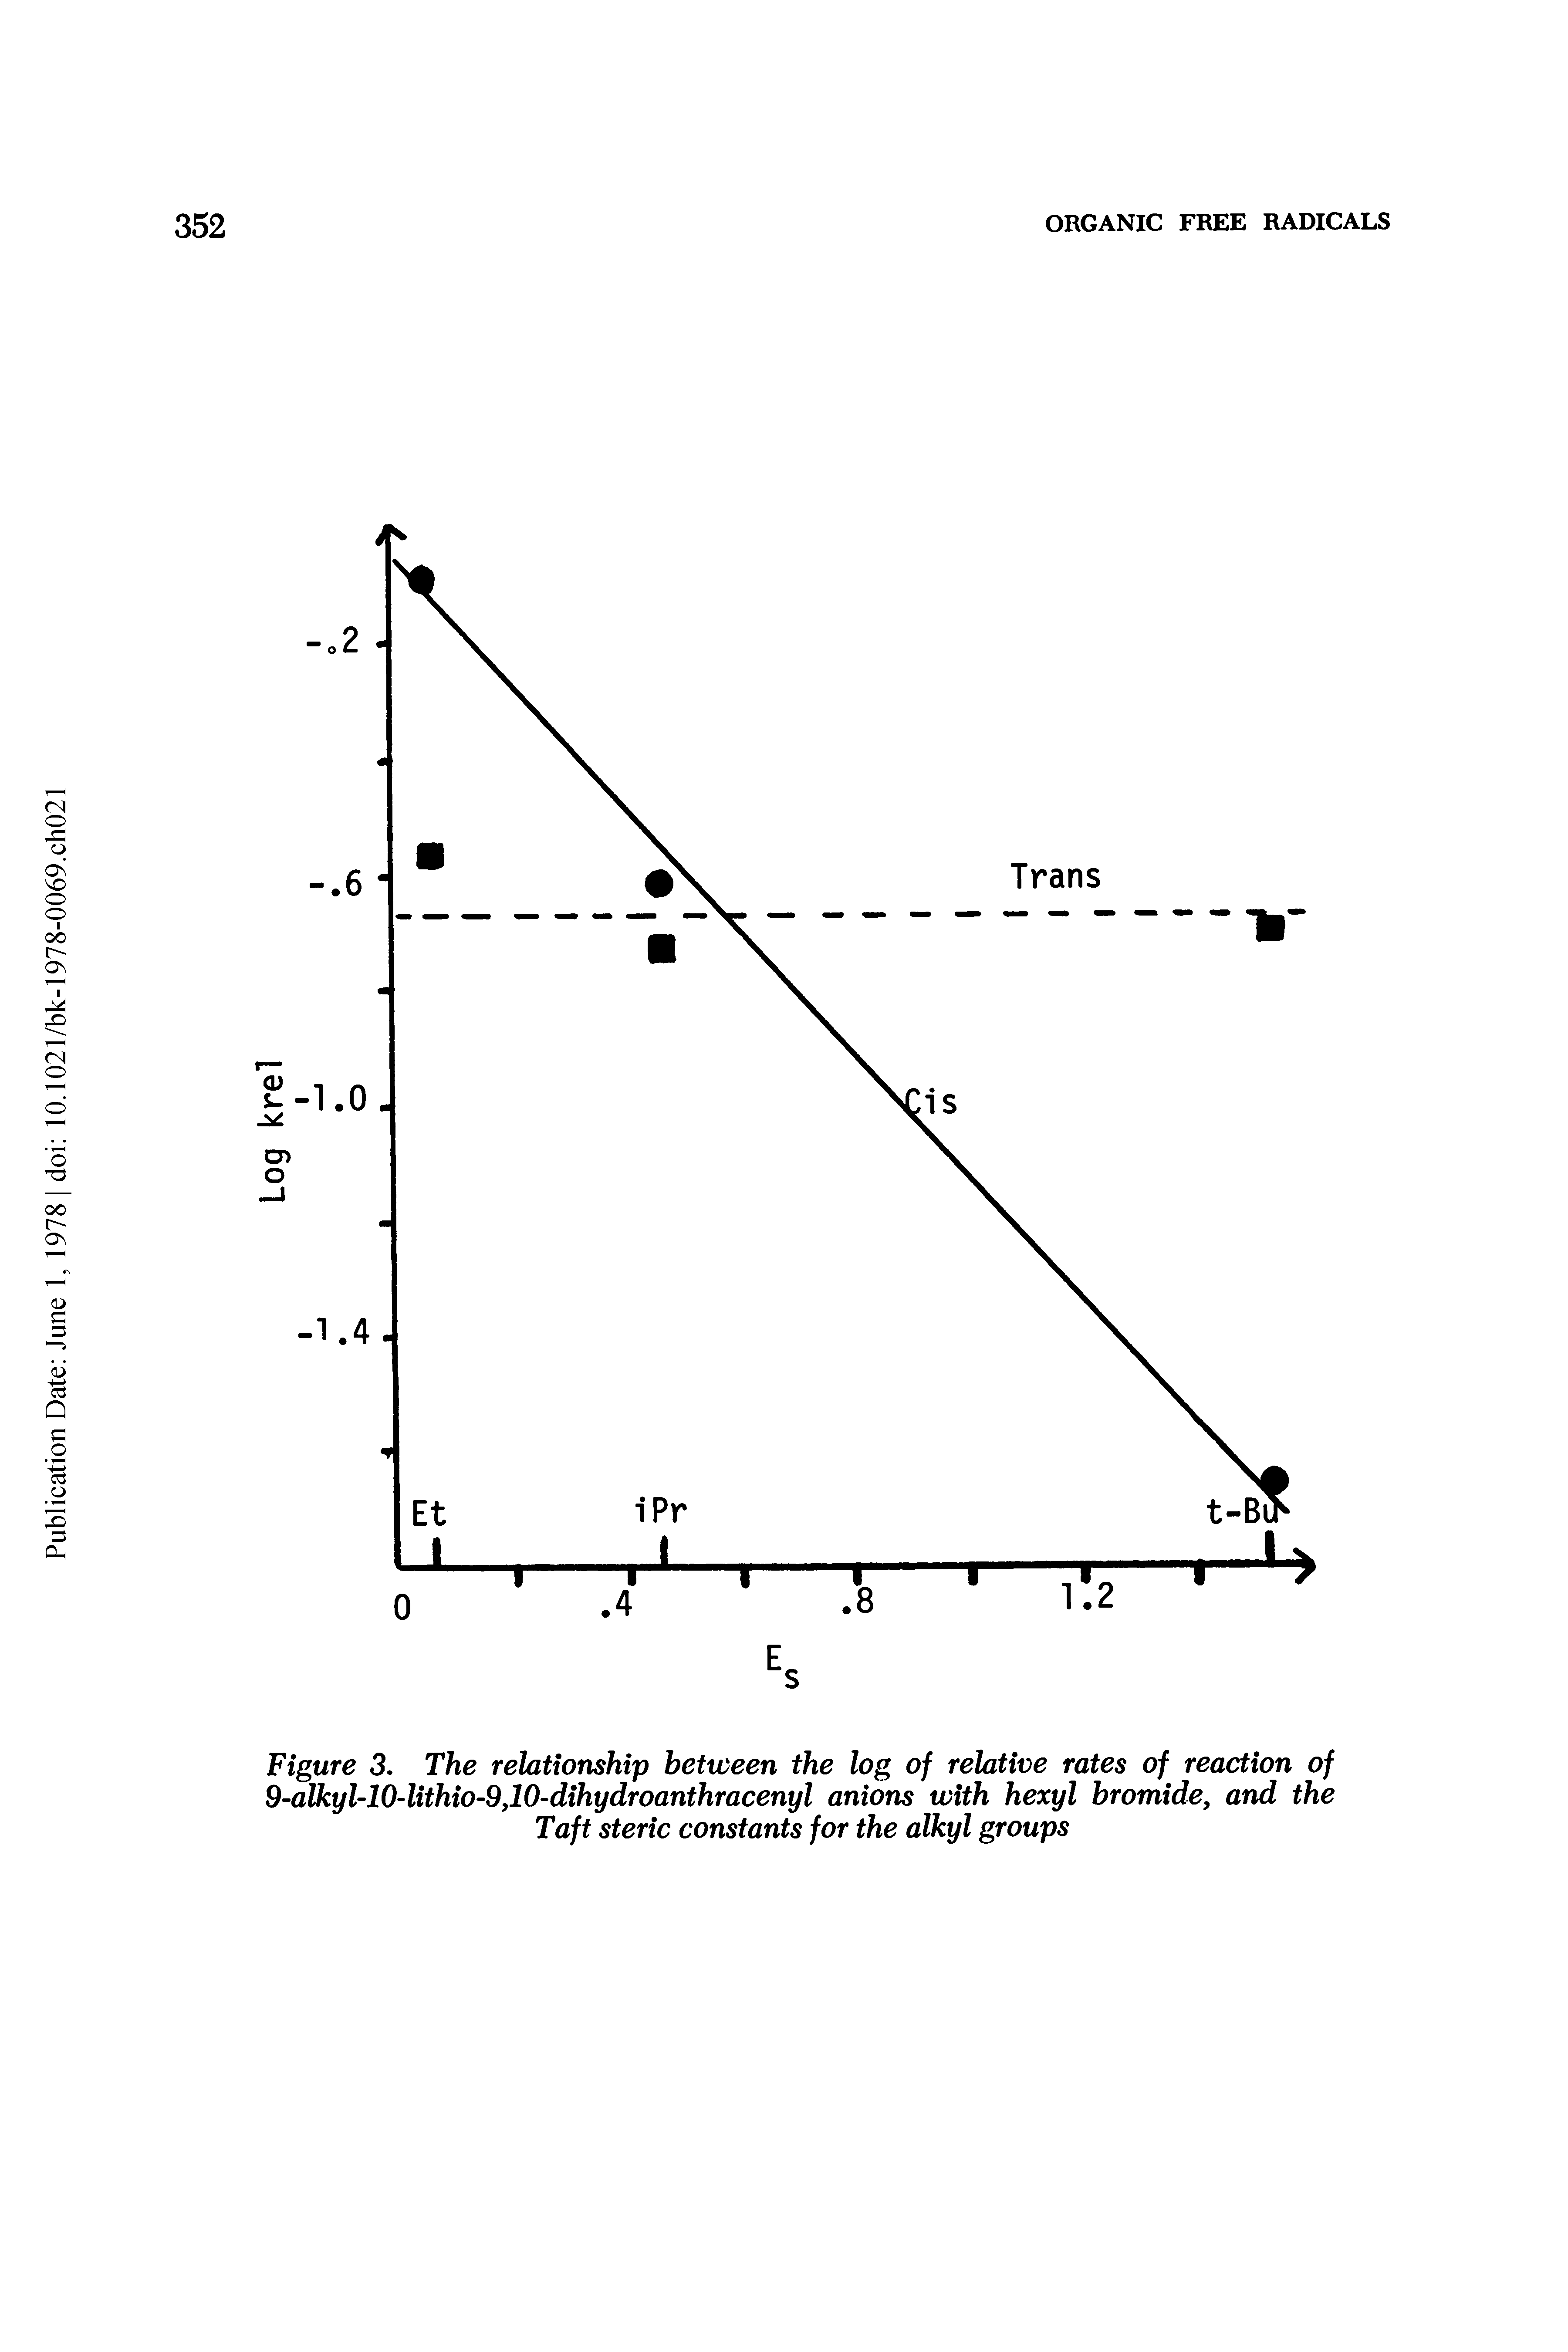 Figure 3. The relationship between the log of relative rates of reaction of 9-alkyl-10-lithio-9,10-dihydroanthracenyl anions with hexyl bromide, and the Taft steric constants for the alkyl groups...